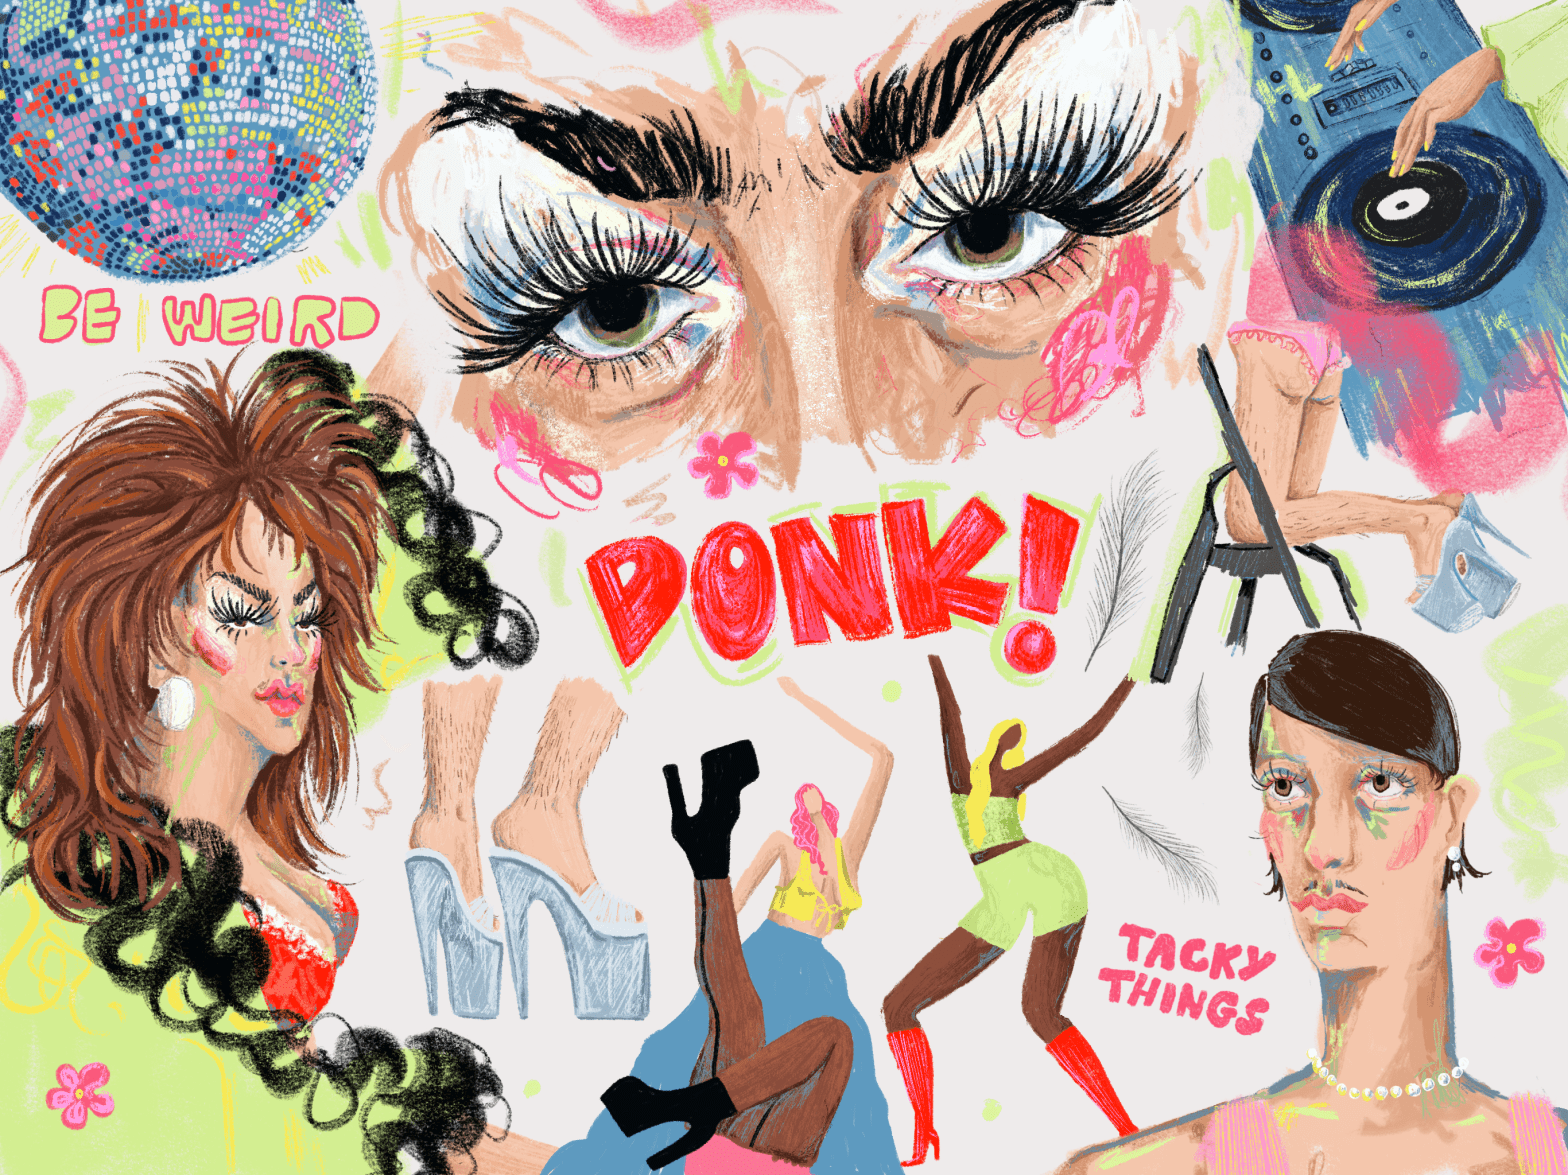 Colourful hand-drawn digital illustration with people in drag outfits and makeup, a DJ and people dancing. The words Donk!, Be Weird and Tacky Things are scattered around the drawing.